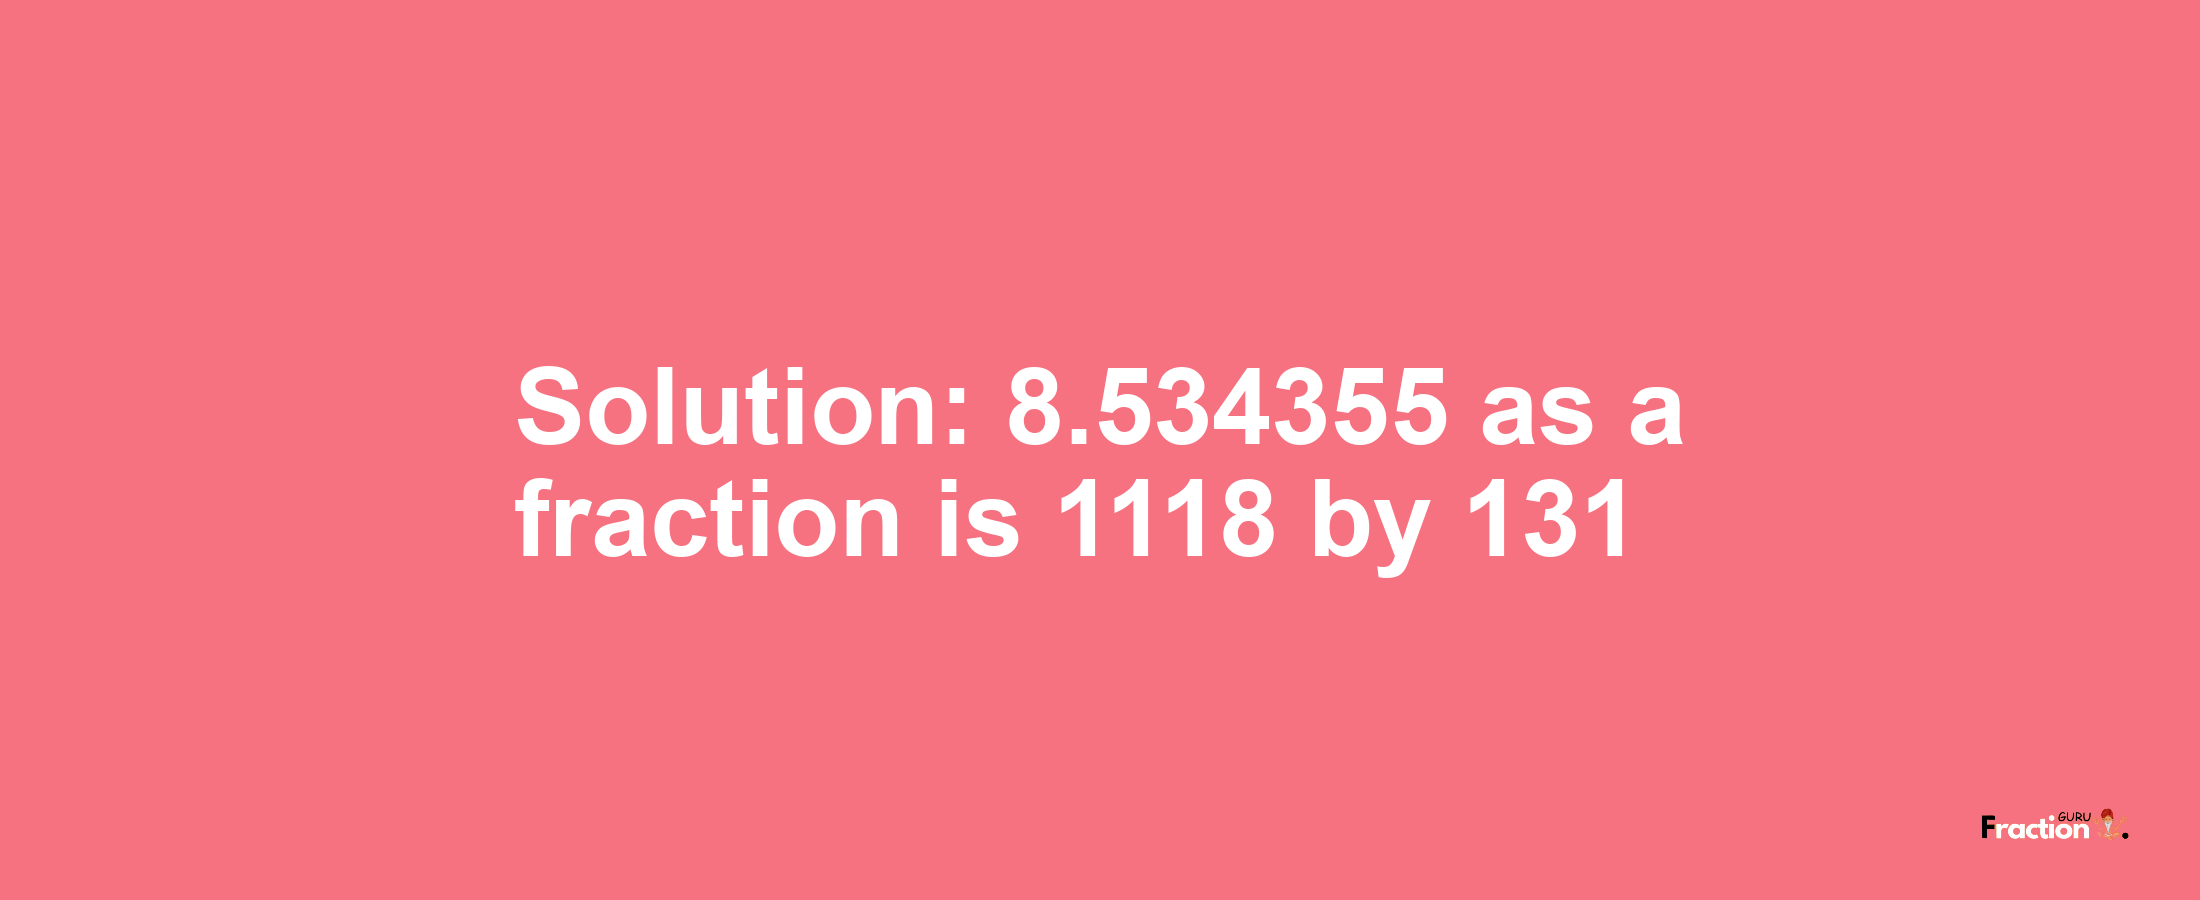 Solution:8.534355 as a fraction is 1118/131